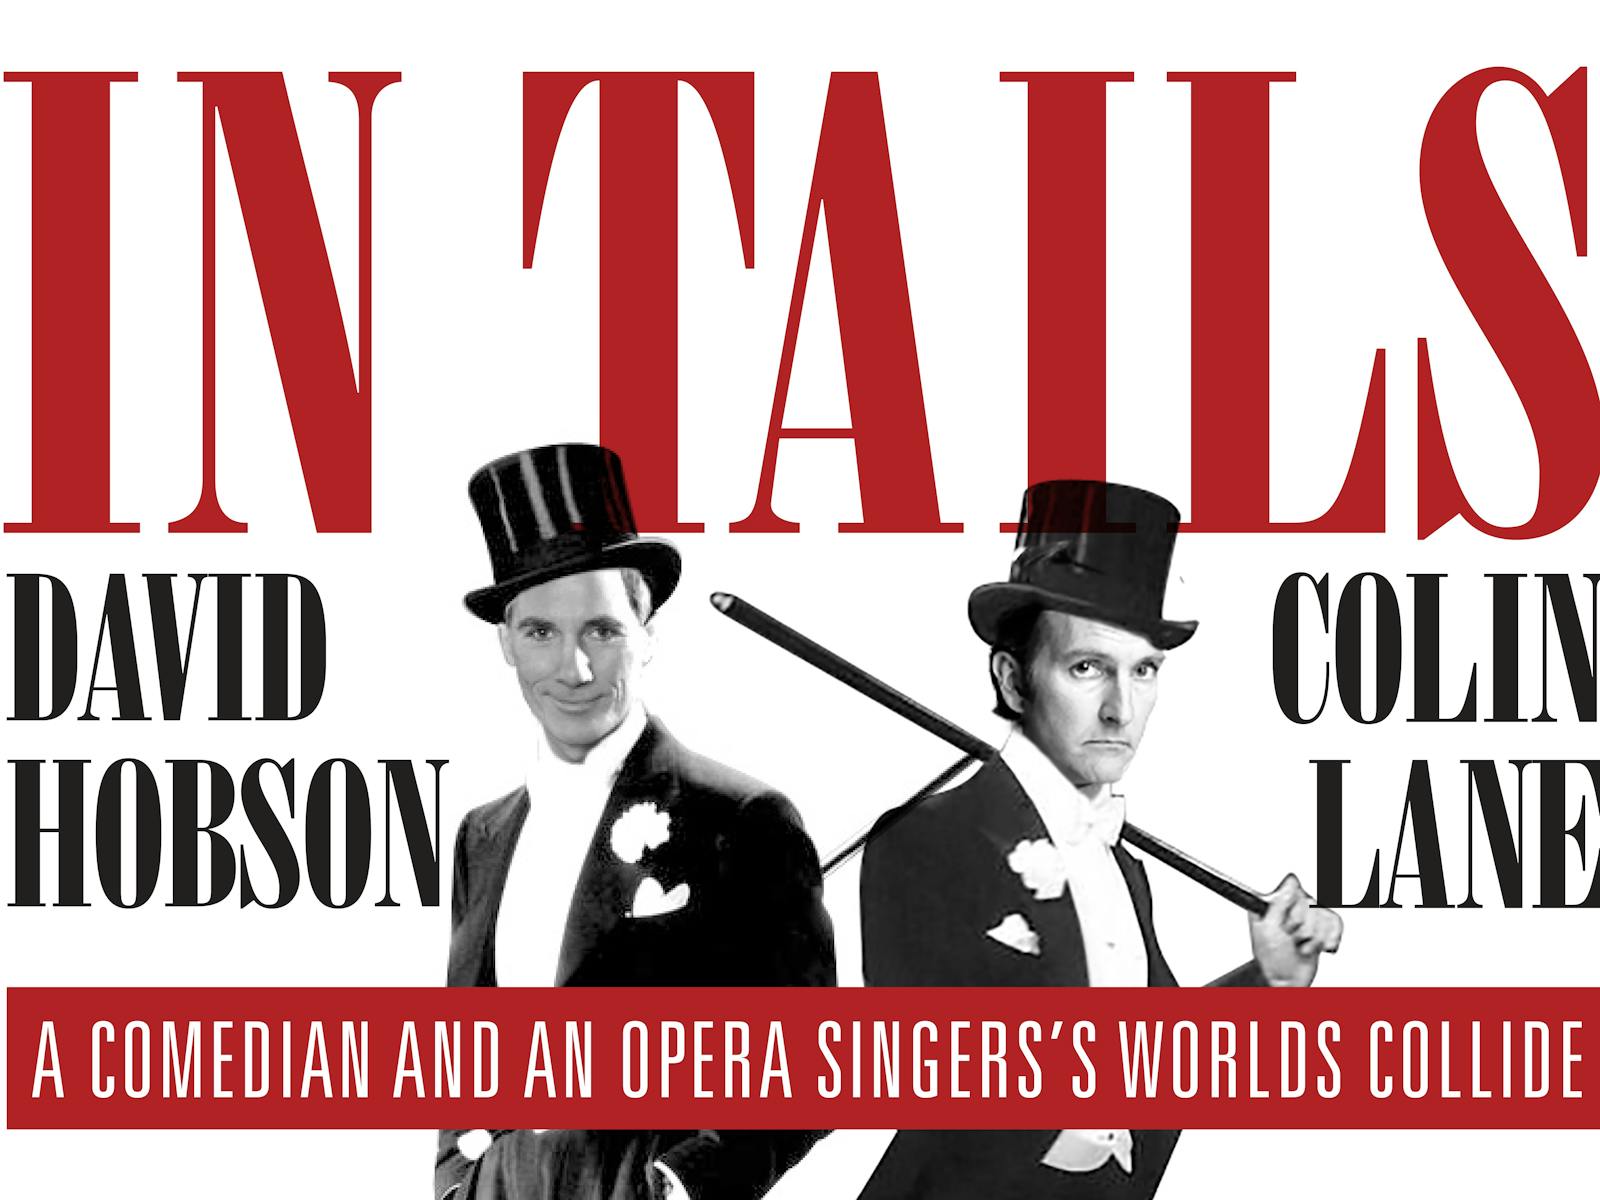 Image for David Hobson and Colin Lane In Tails